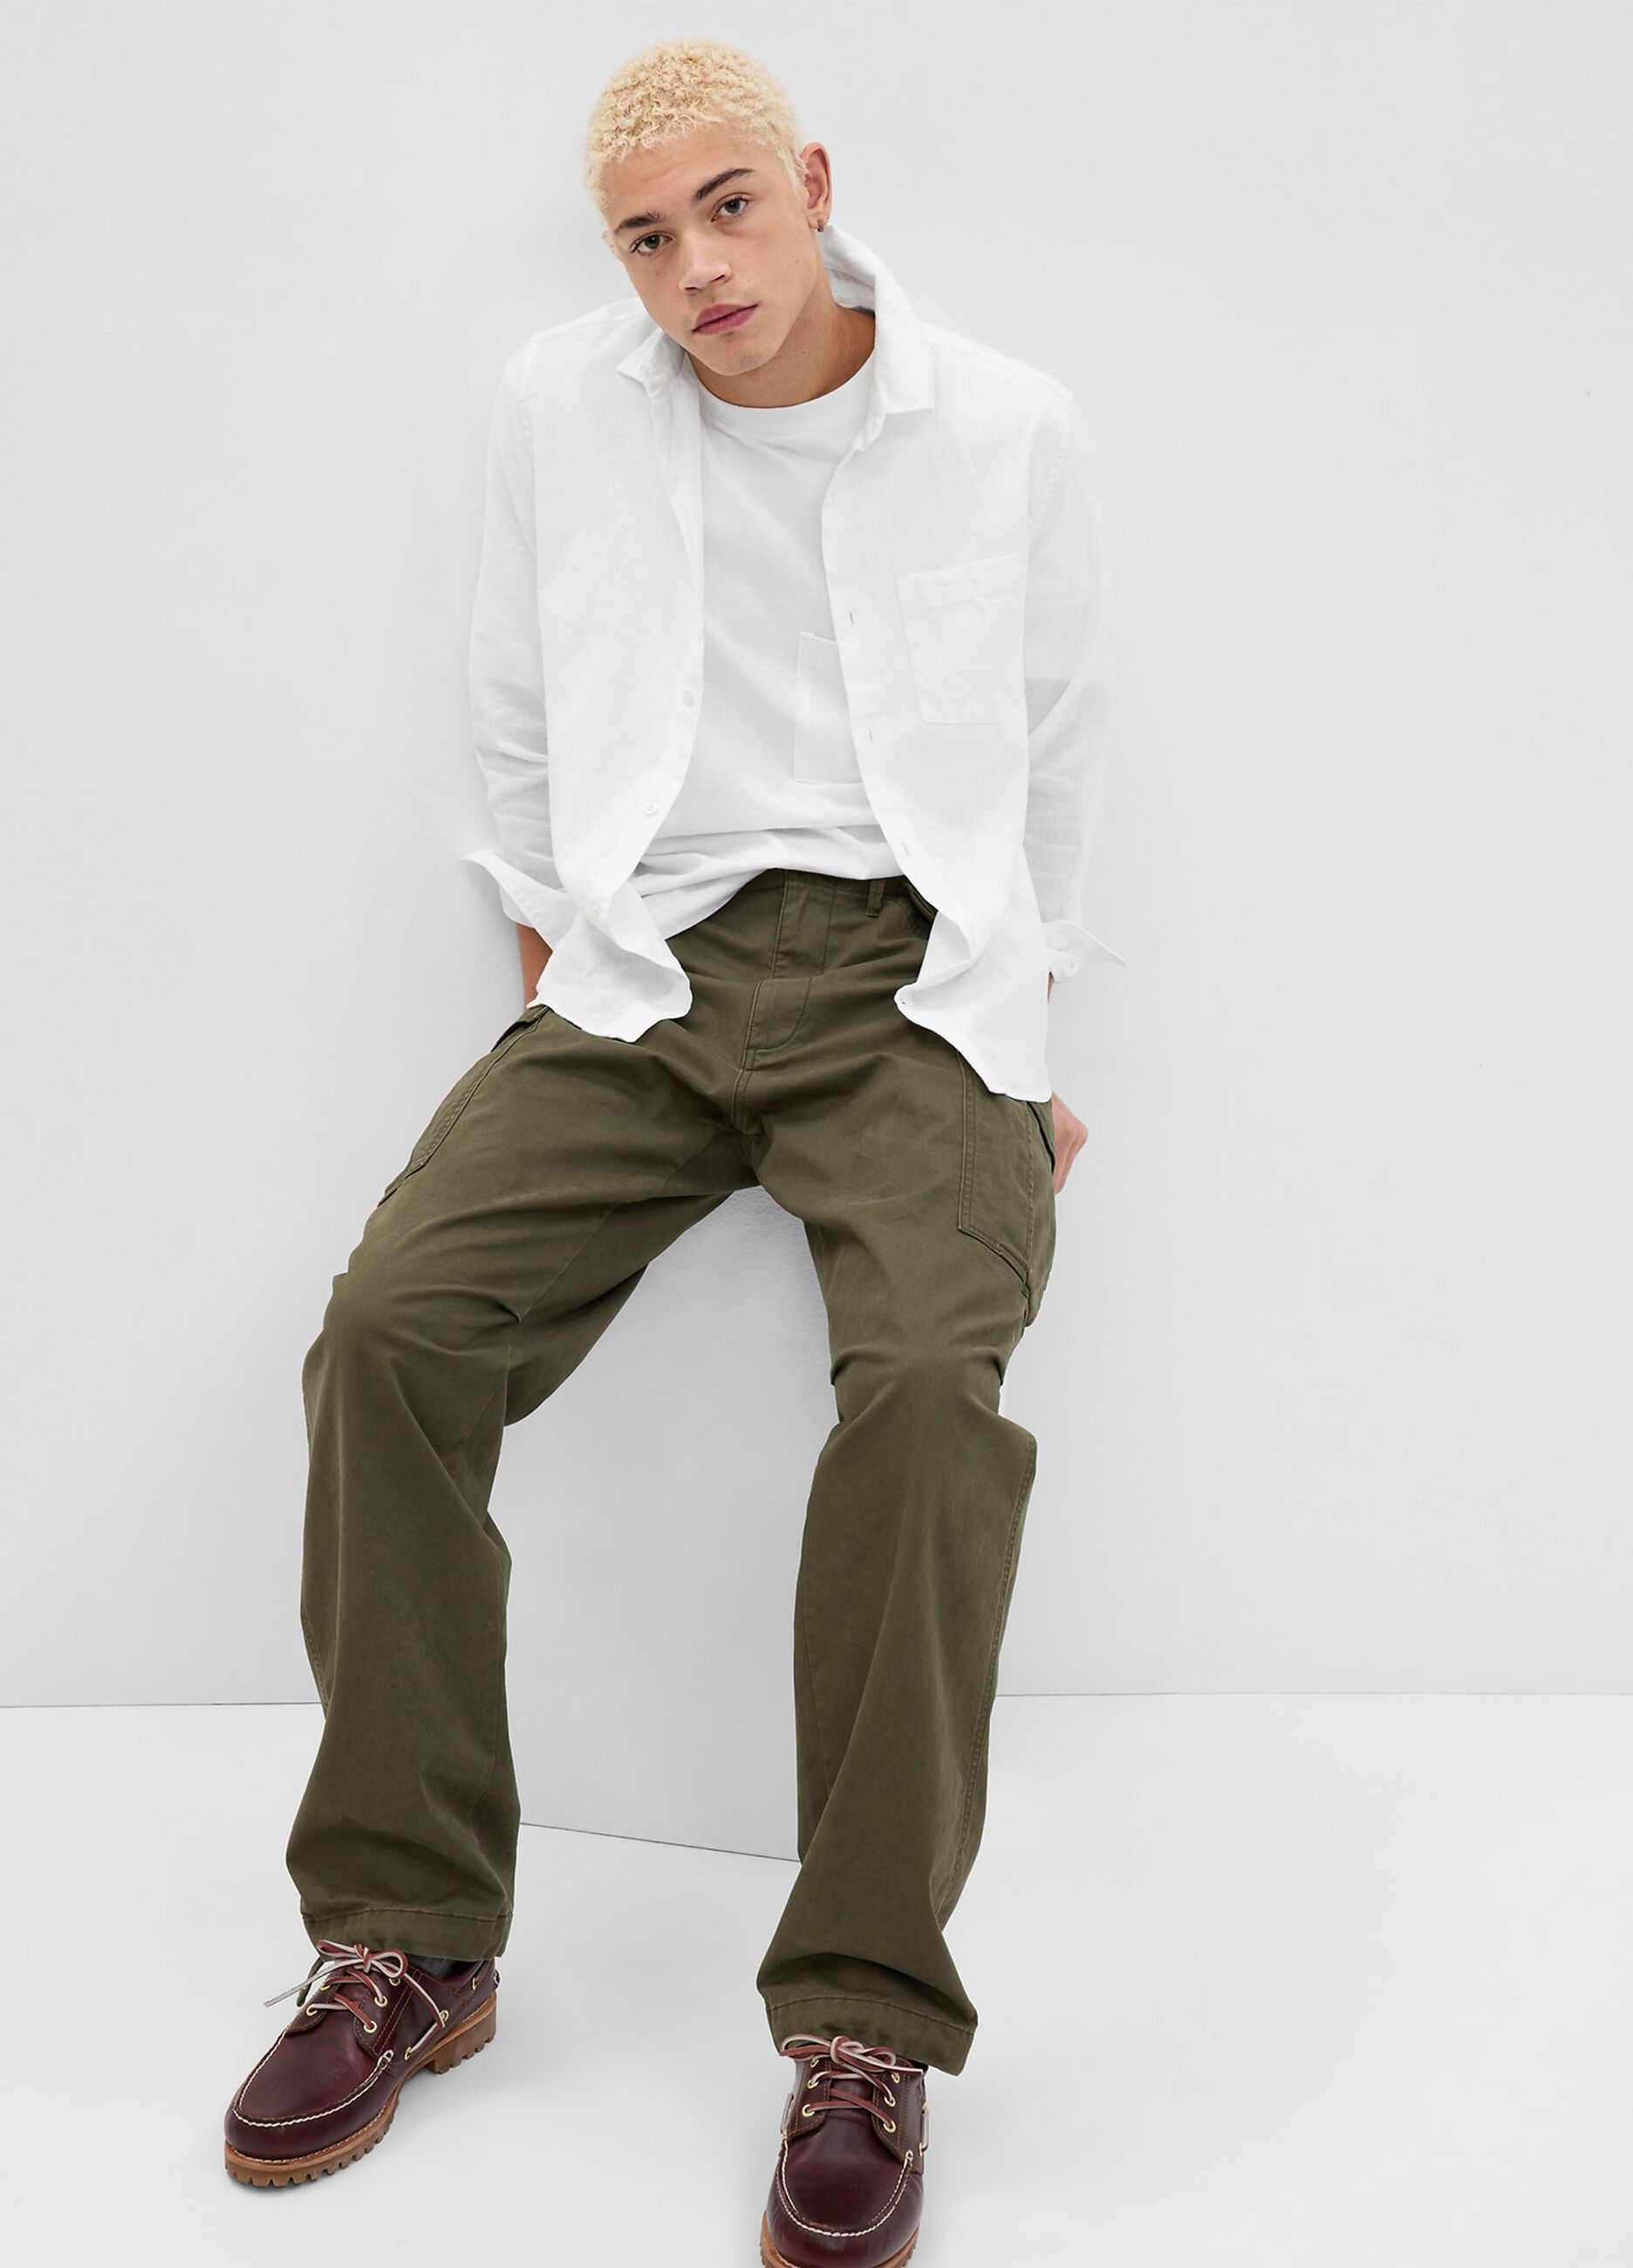 Linen and cotton shirt with pocket